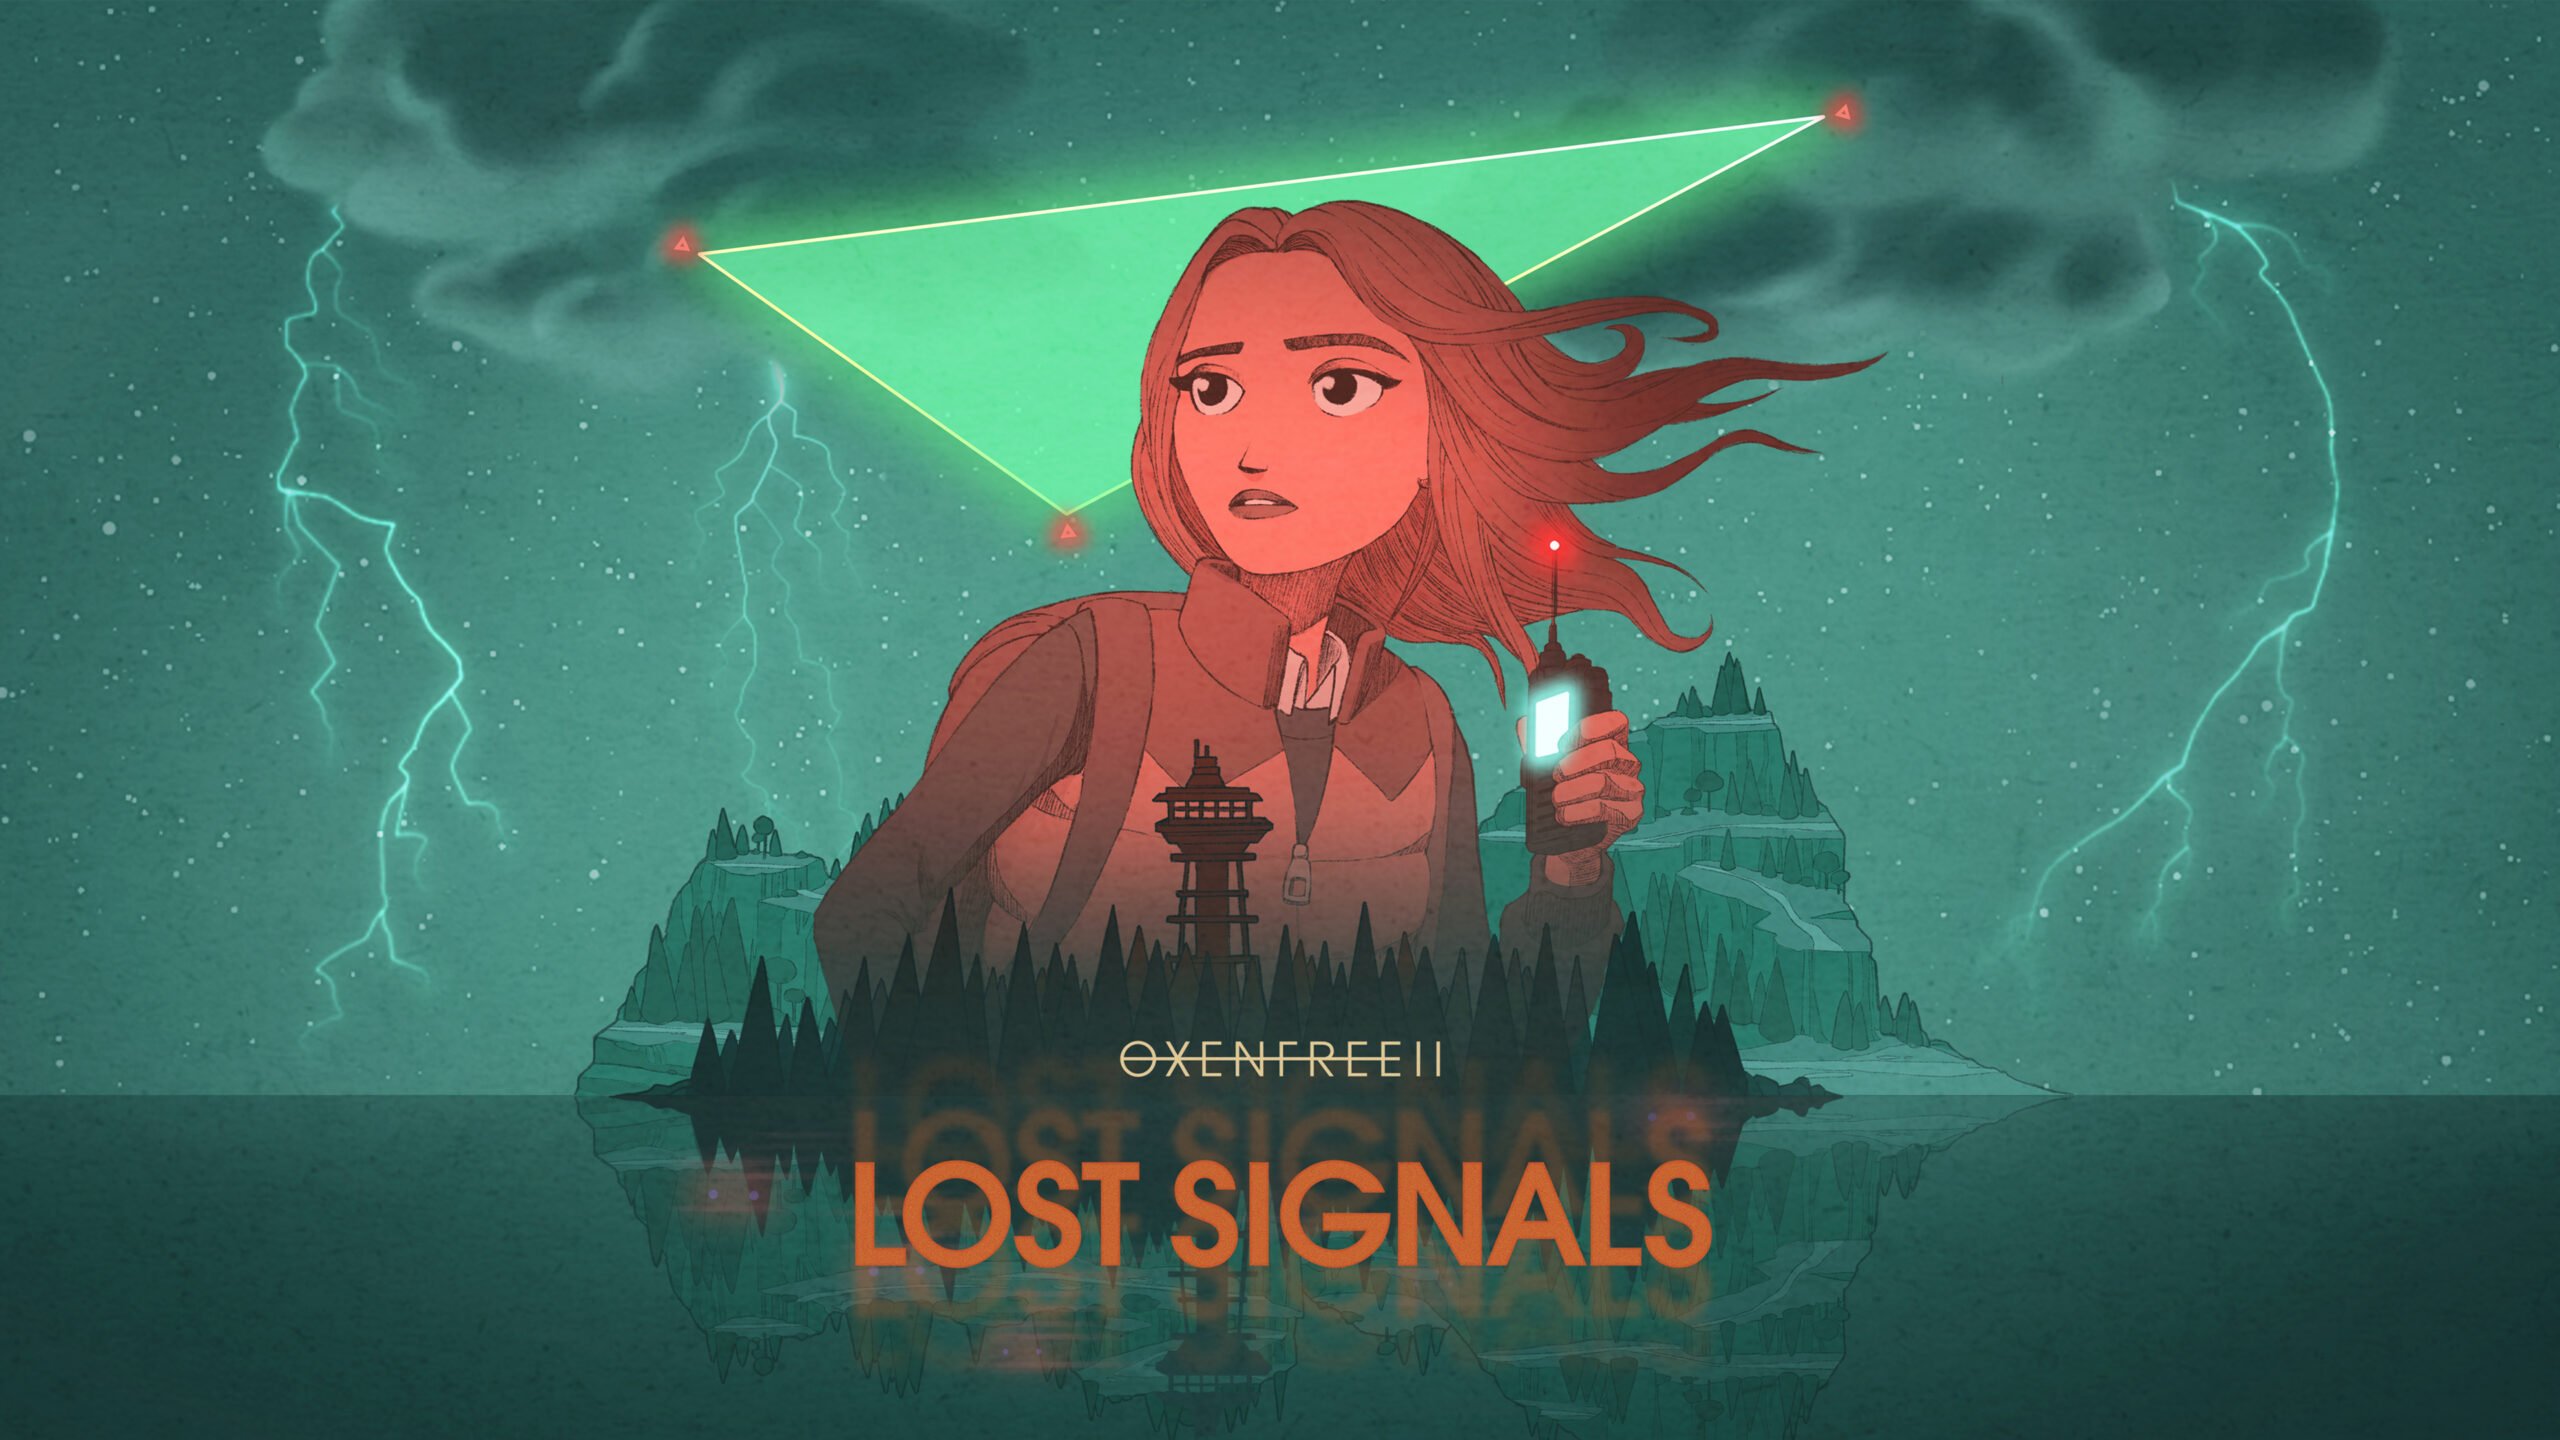 Oxenfree II: Lost Signals review